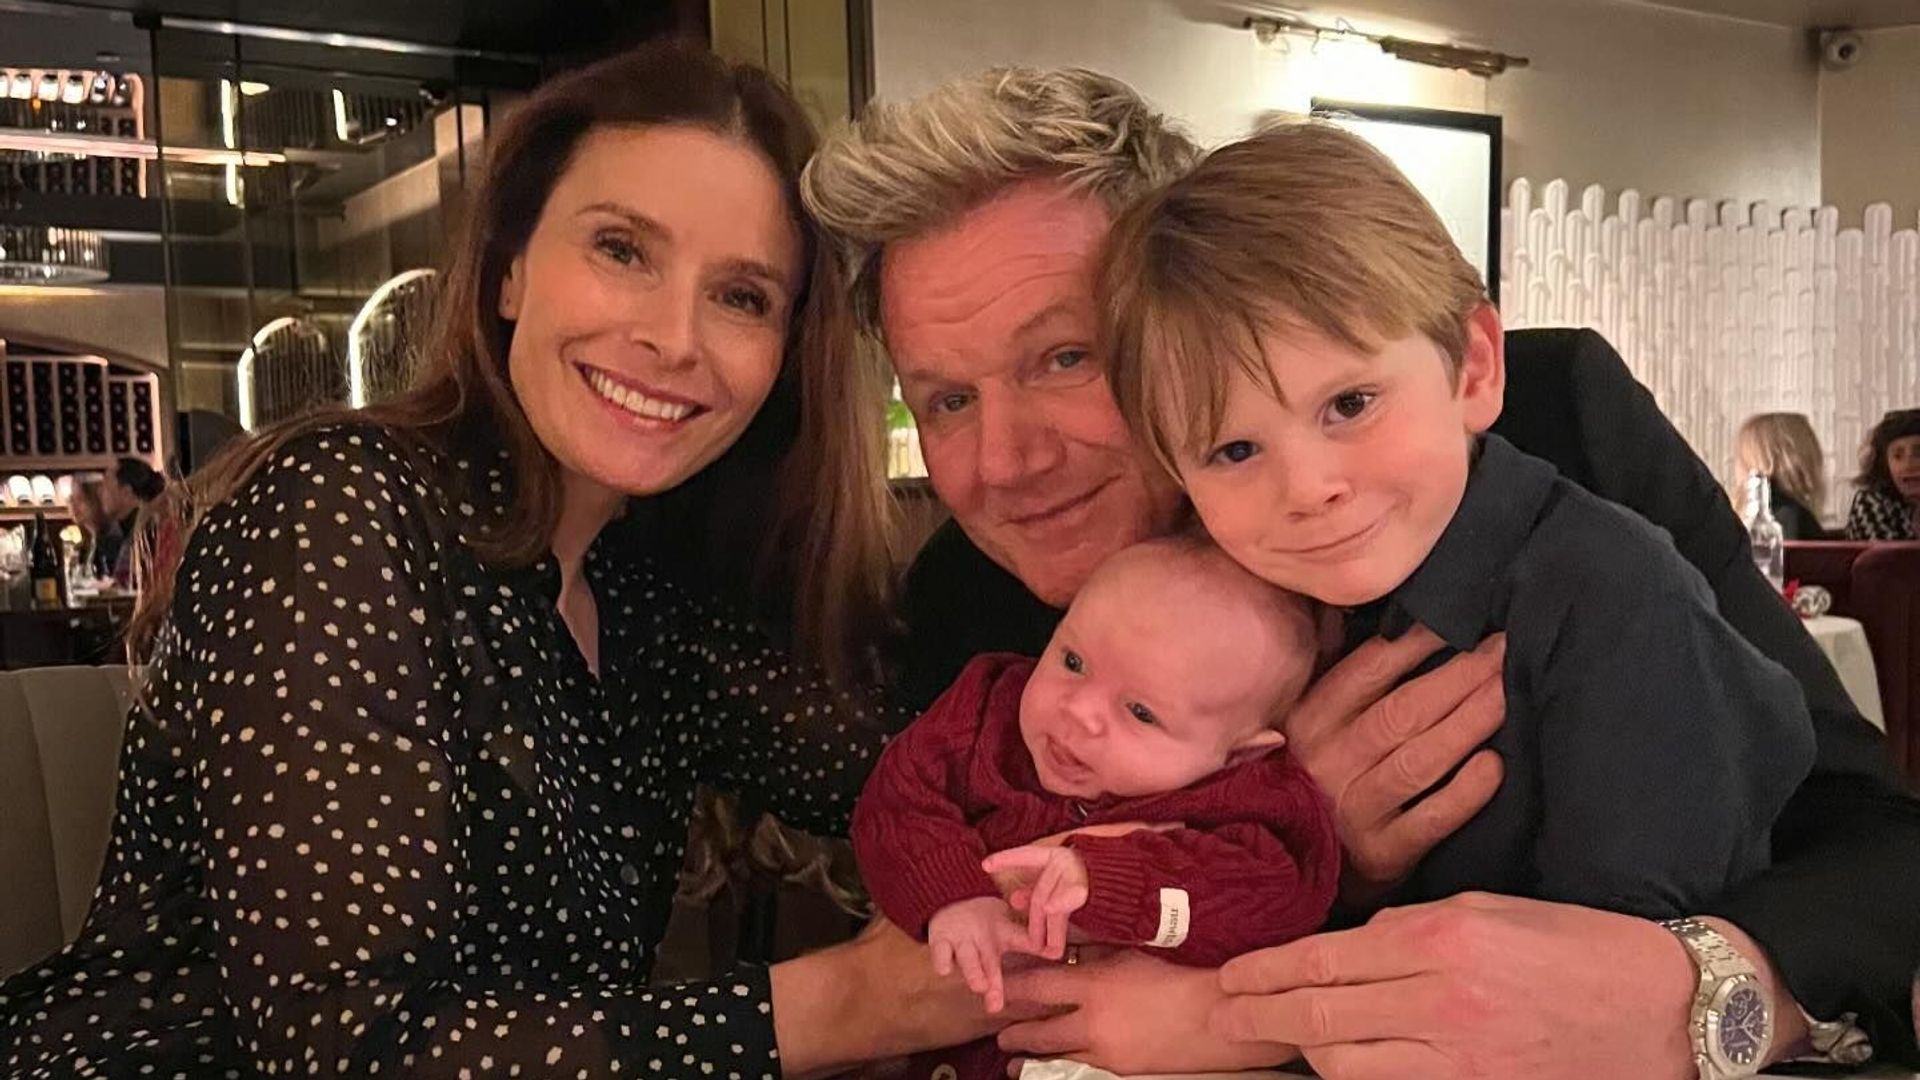 Tana Ramsay looked radiant beside her husband and two youngest sons